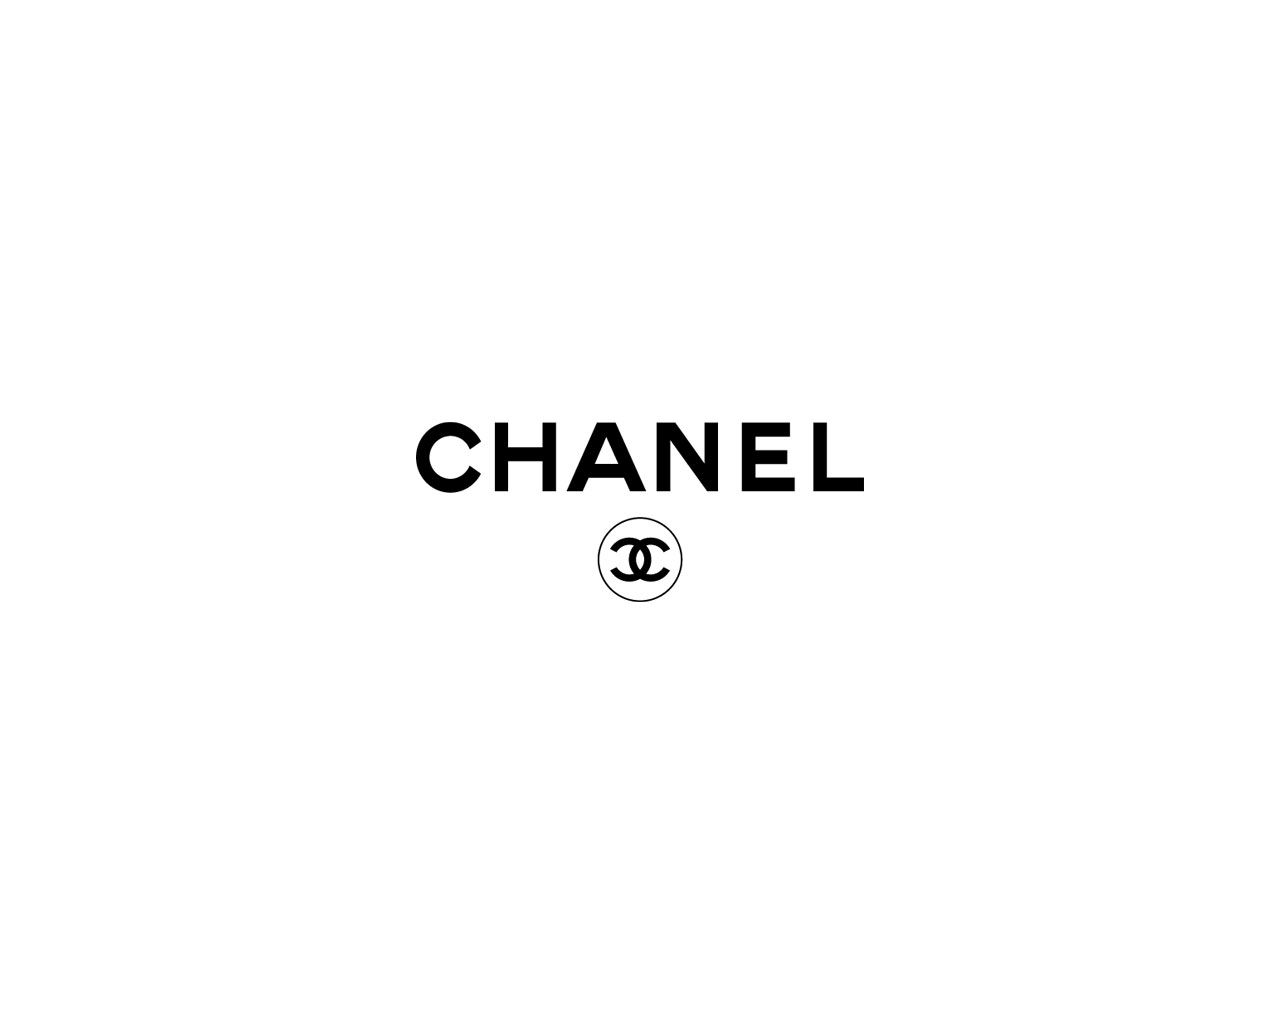 Chanel Logo Wallpapers - Wallpaper Cave